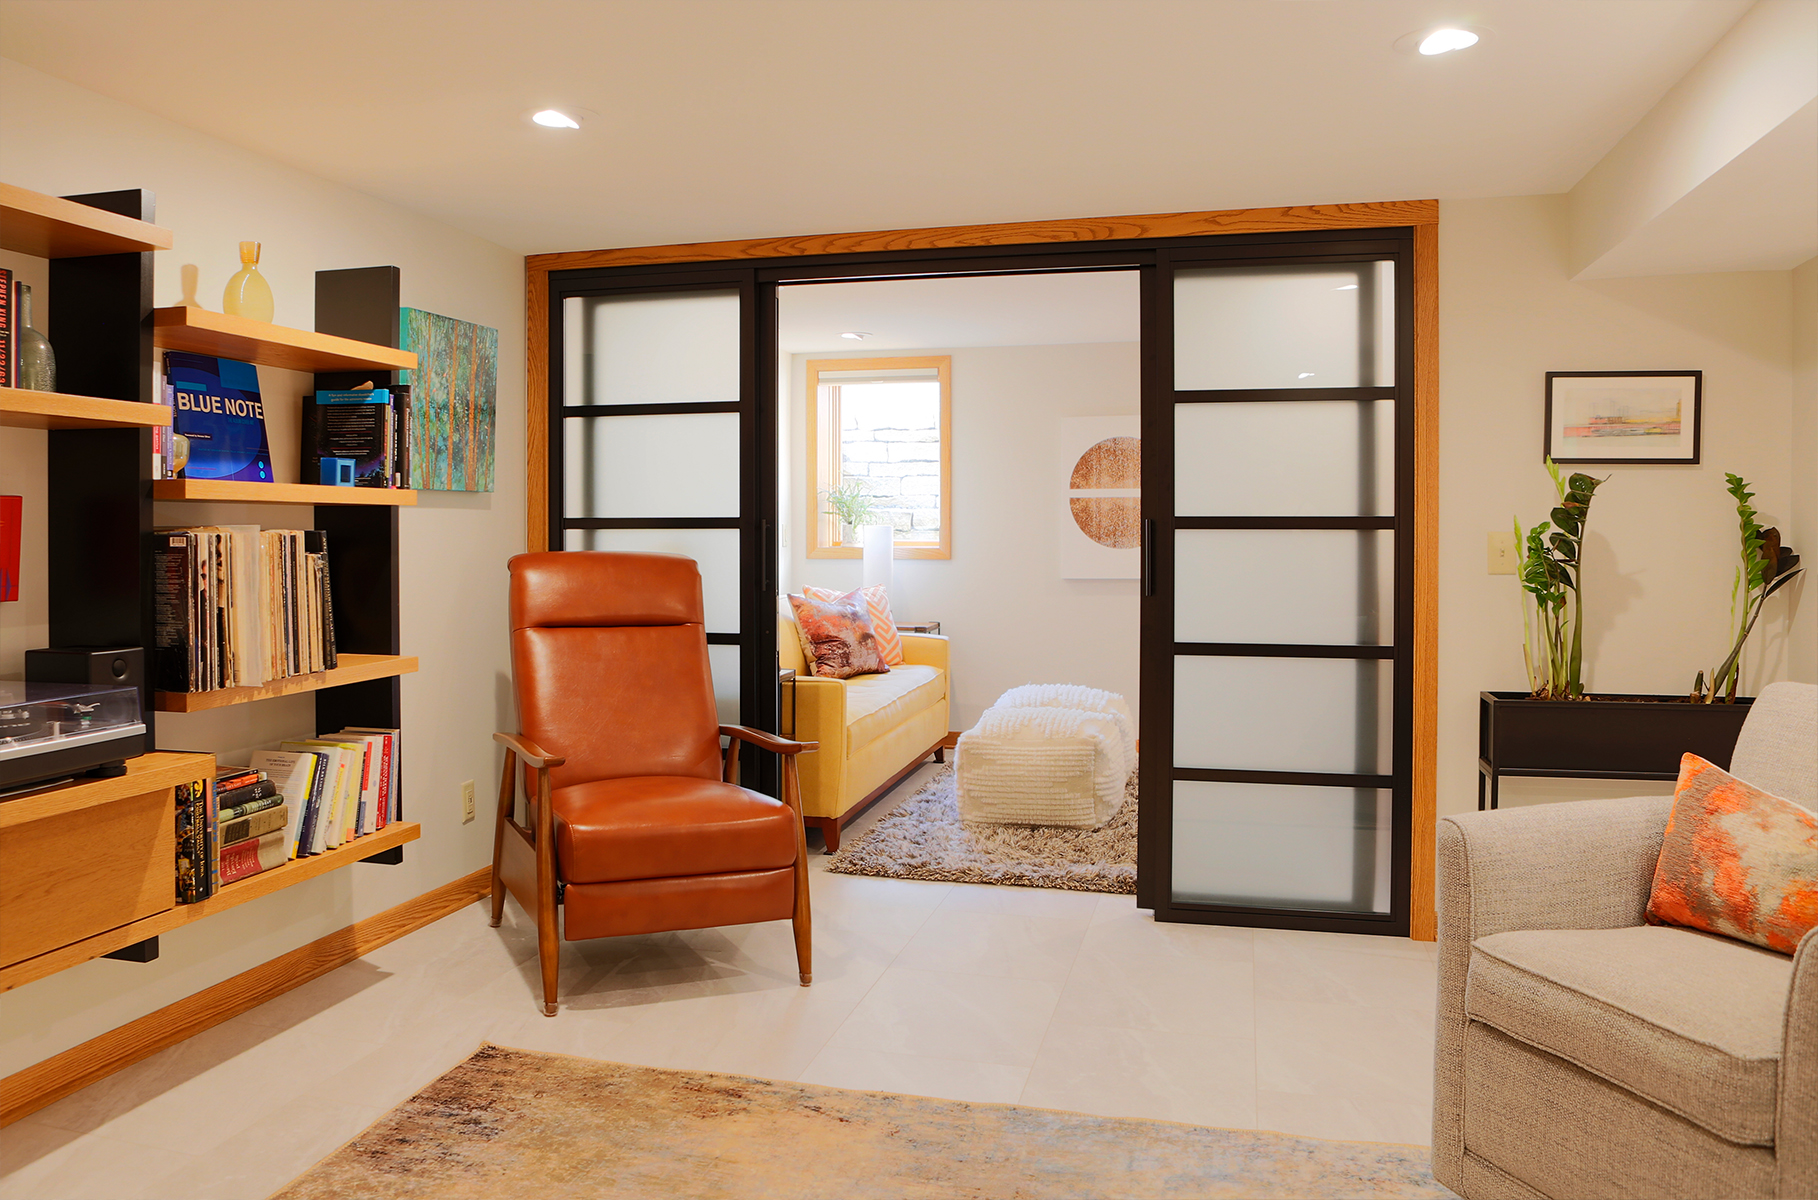 A full color image of a lower level entertaining space with built-in shelves and sliding doors opening to a guest suite